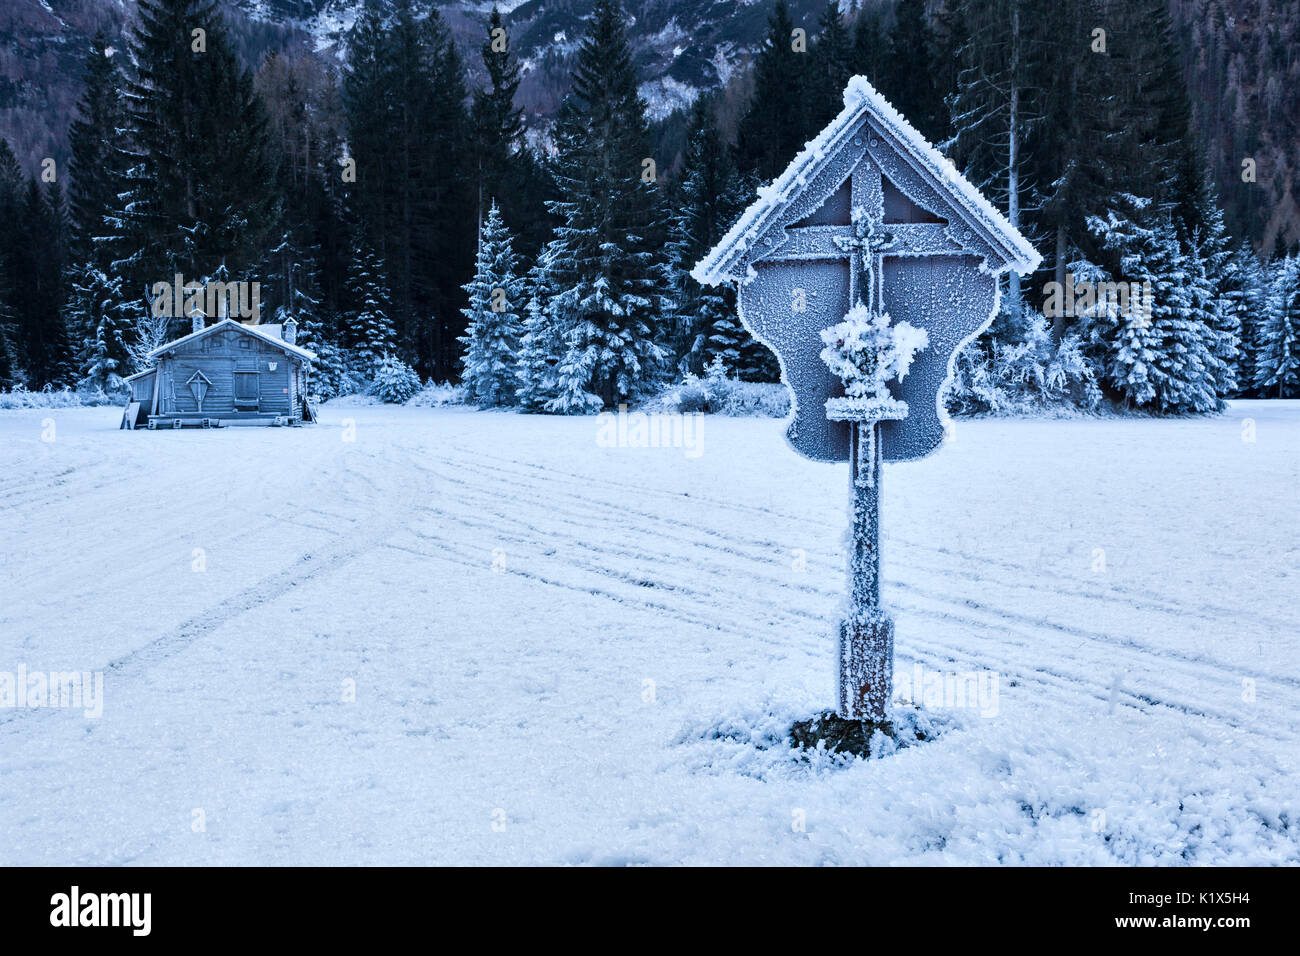 Europe, Italy, Veneto, Belluno. A wooden hut and a crucifix covered with ice in Ansiei valley in winter, Auronzo di Cadore, Dolomites Stock Photo